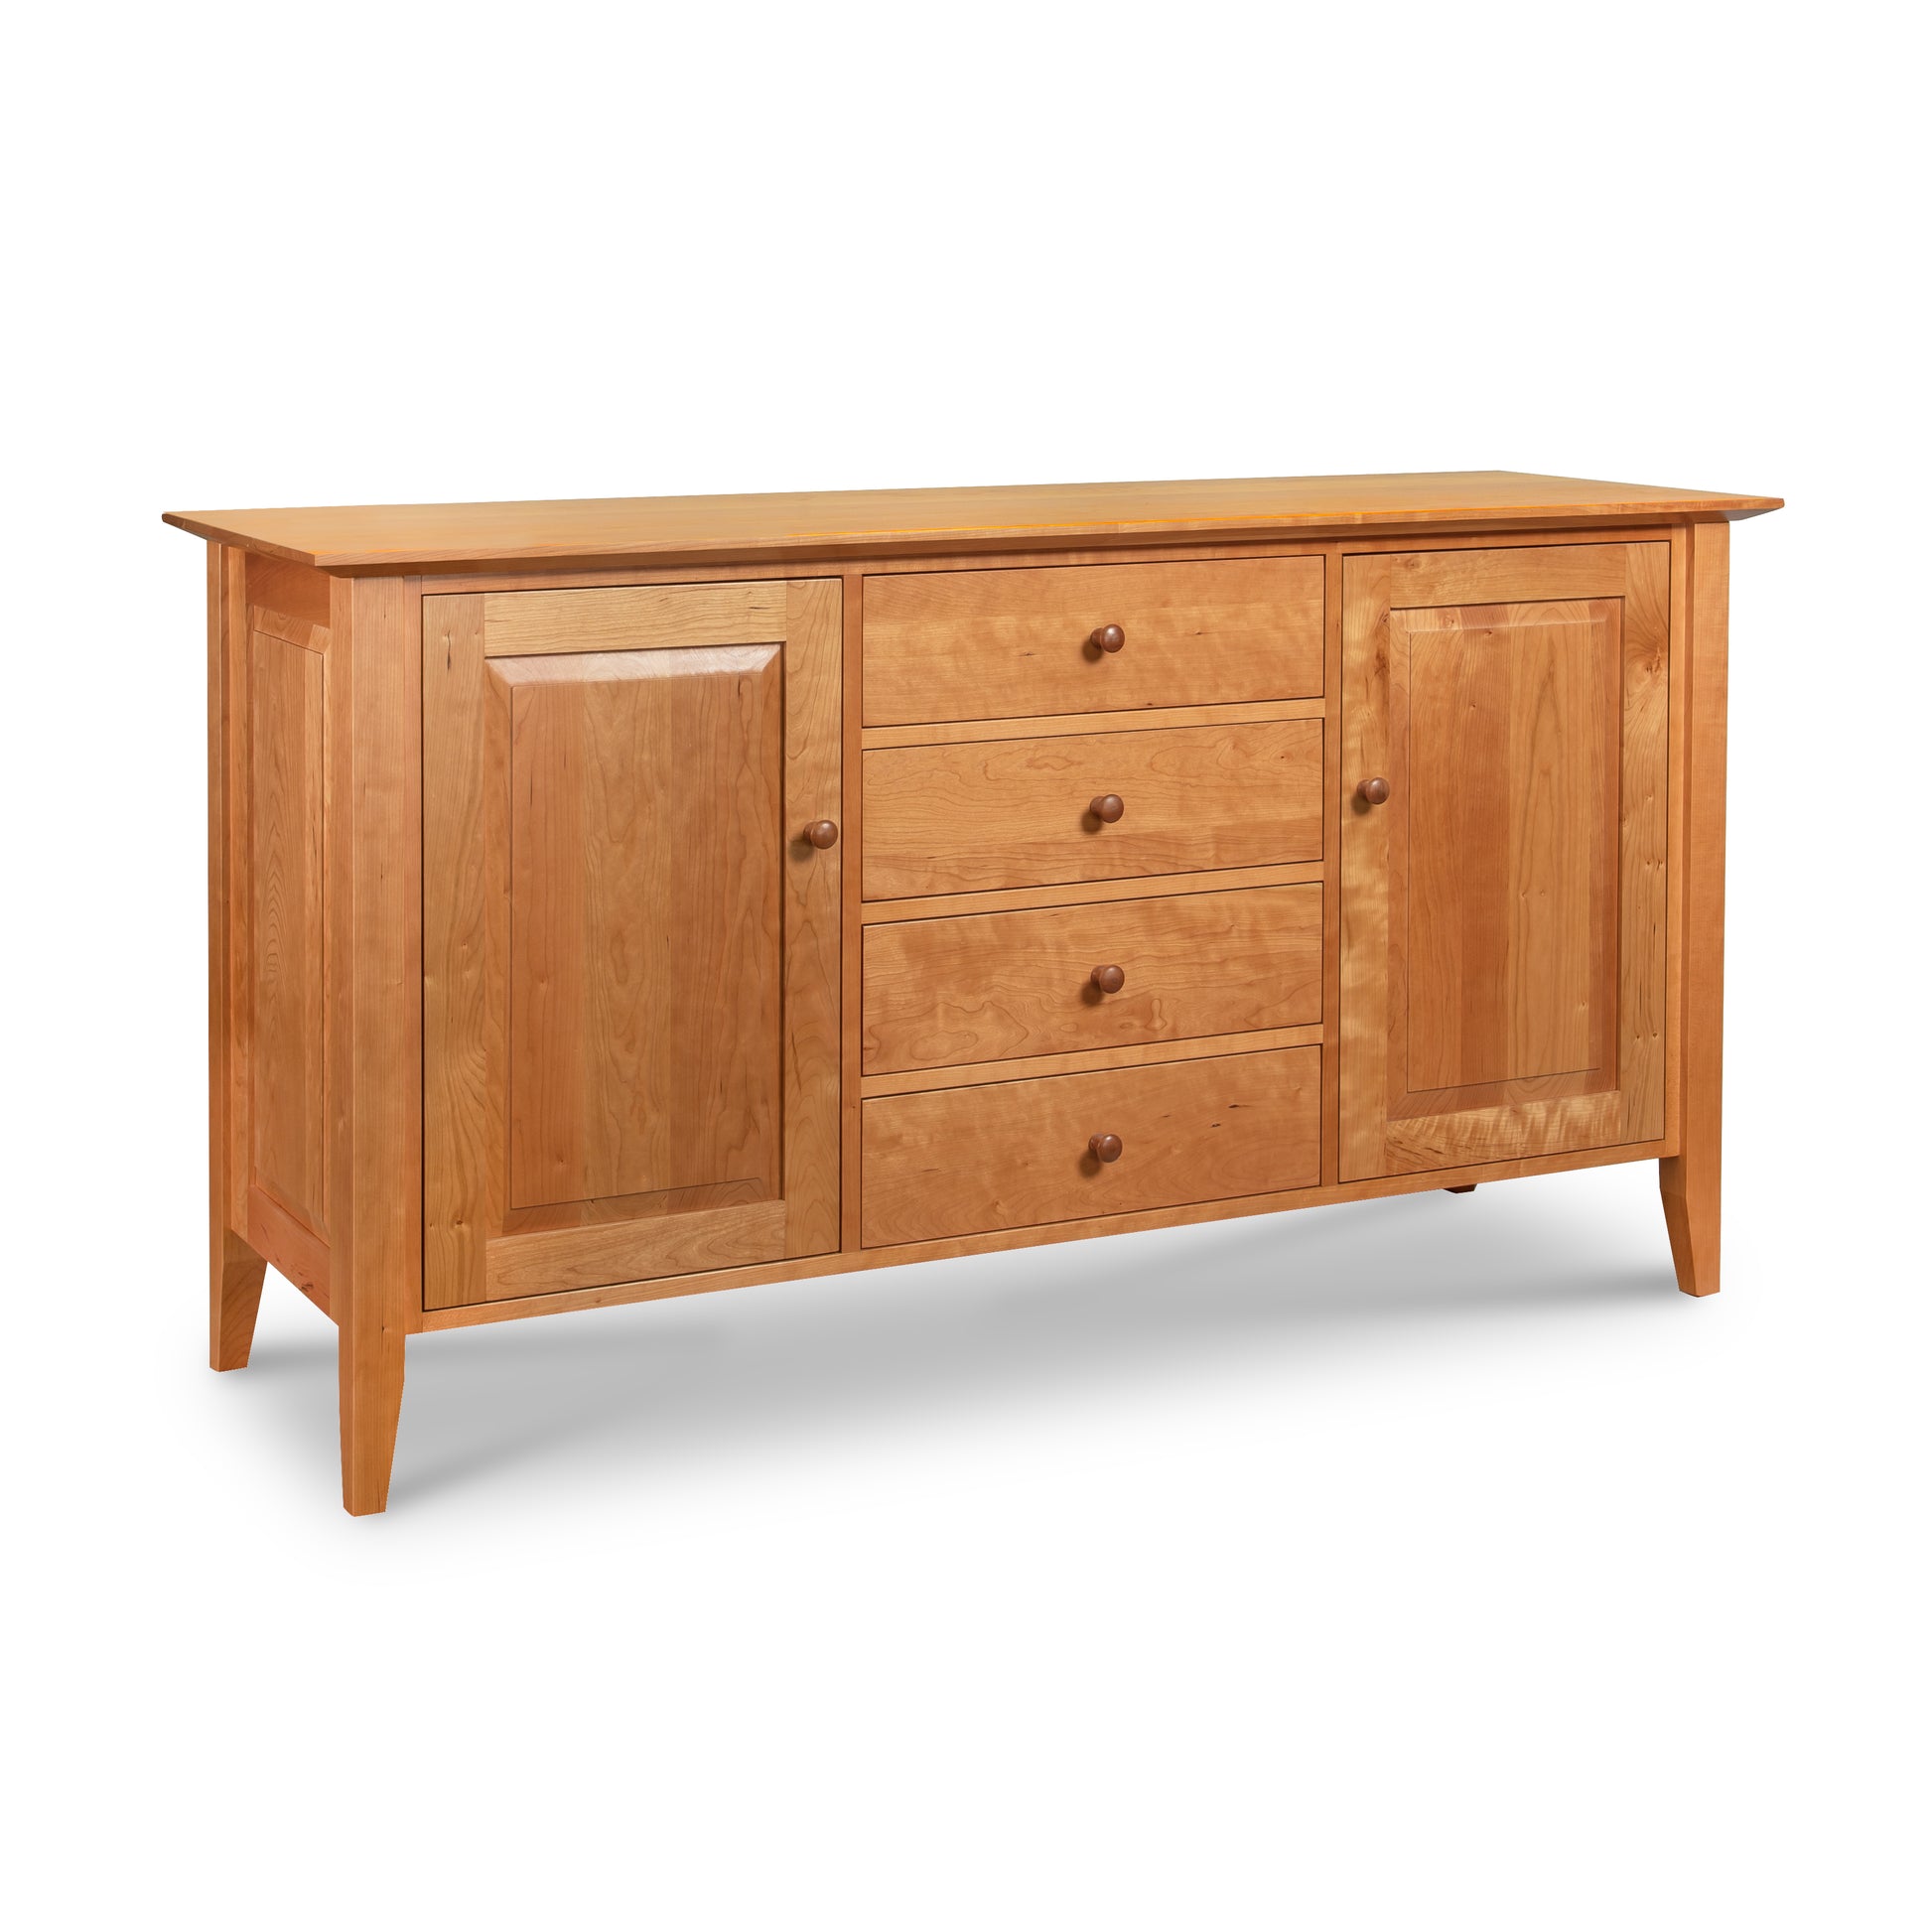 A Classic Shaker Large Buffet with drawers, crafted from fine hardwoods, and made by Lyndon Furniture.